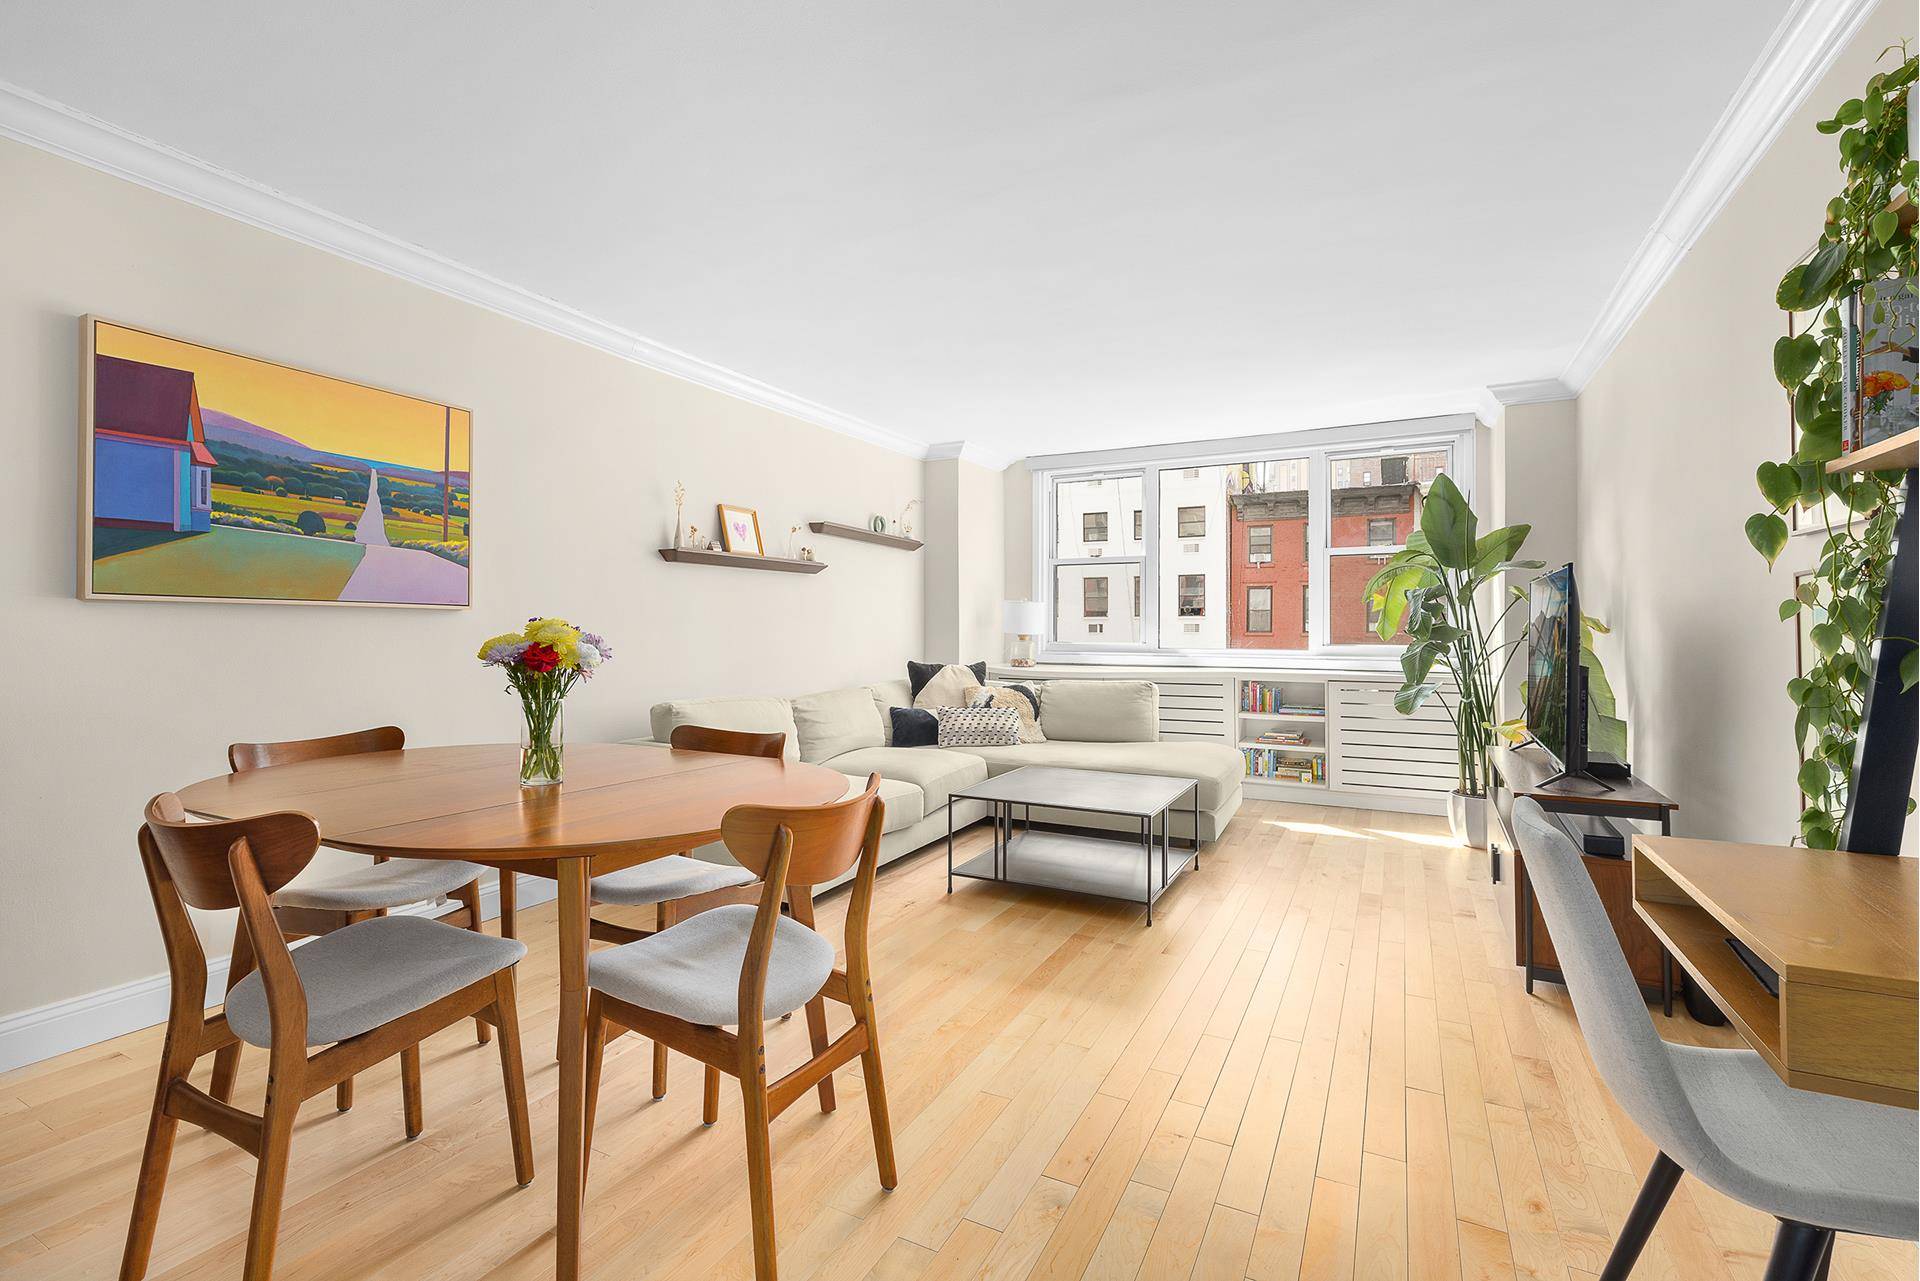 Move In Ready ! Oversized one bedroom home situated at the crossroads of Chelsea and the West Village located in the Vermeer one of the best managed luxury cooperatives in ...